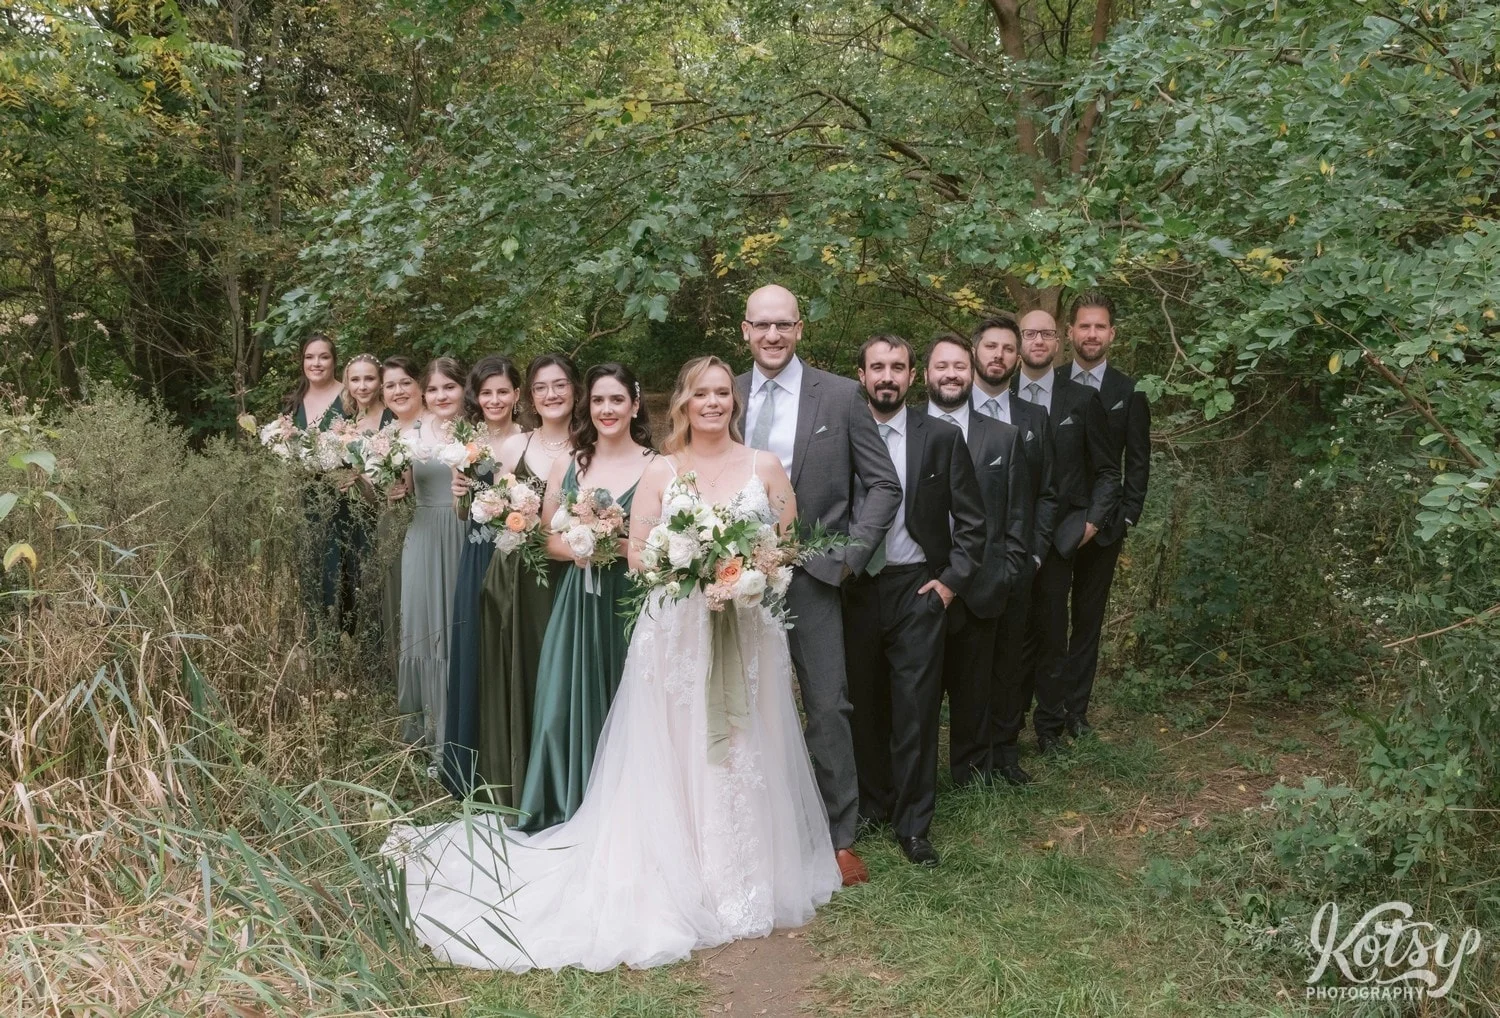 A bride groom and wedding party complete with flower bouquets white bridal gown and green bridesmaid dresses black groomsmen suits and gray suit on groom pose for a group photo and a triangular pattern at West Deane Park in Toronto, Canada